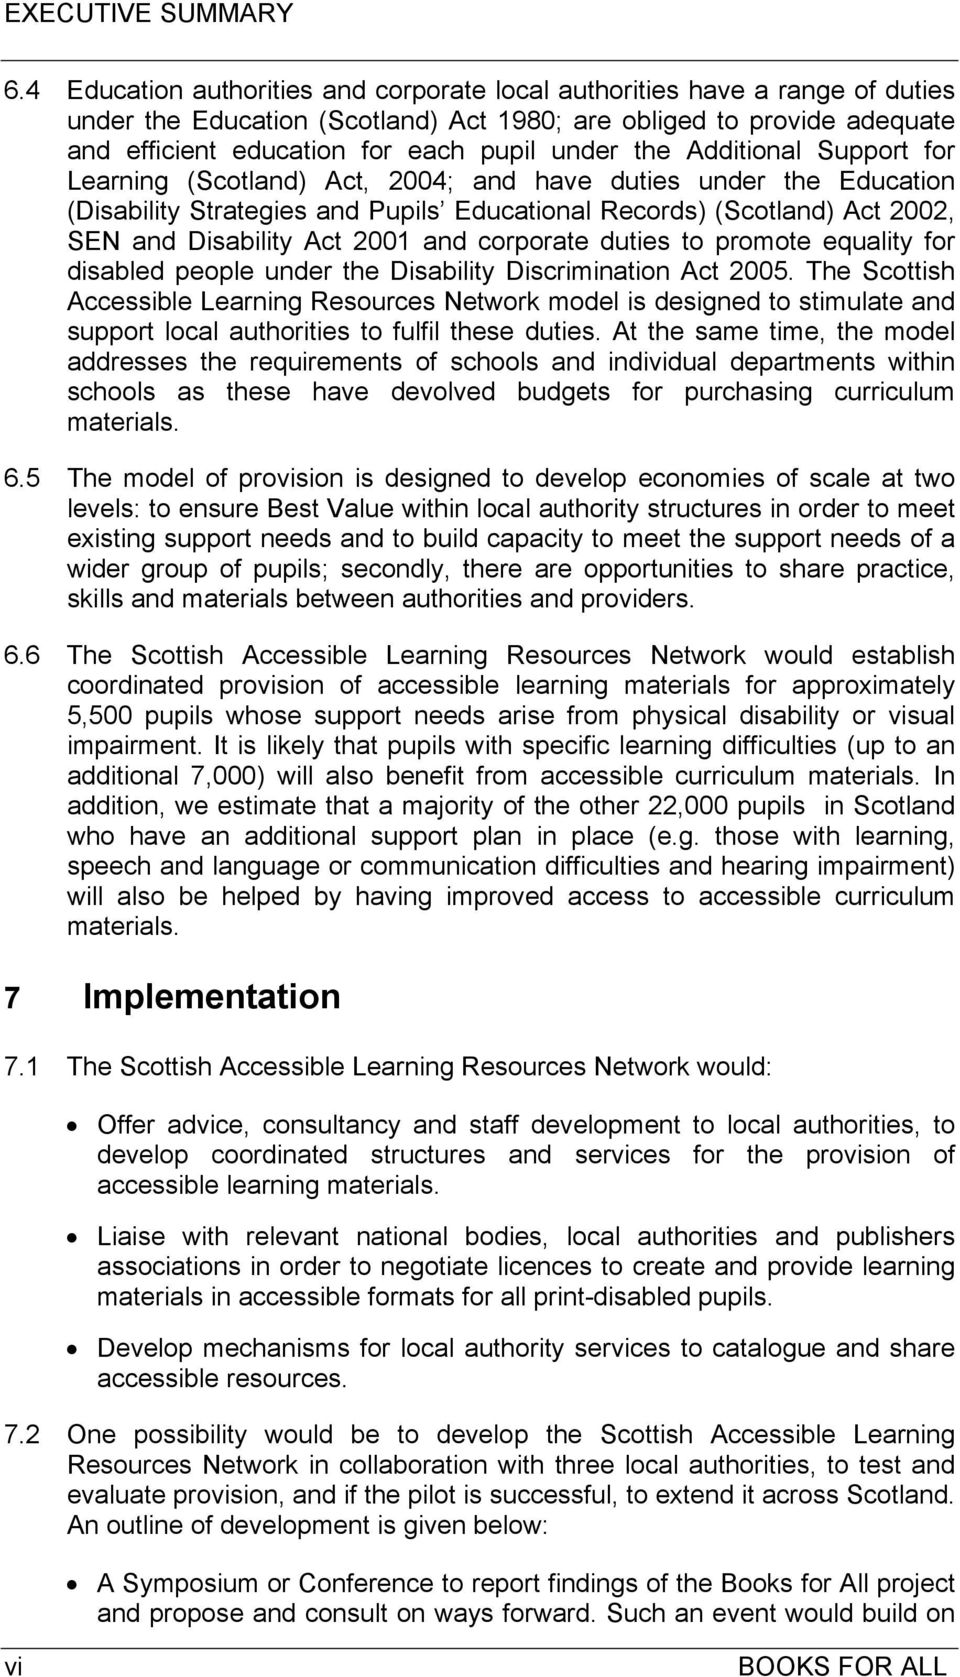 the Additional Support for Learning (Scotland) Act, 2004; and have duties under the Education (Disability Strategies and Pupils Educational Records) (Scotland) Act 2002, SEN and Disability Act 2001